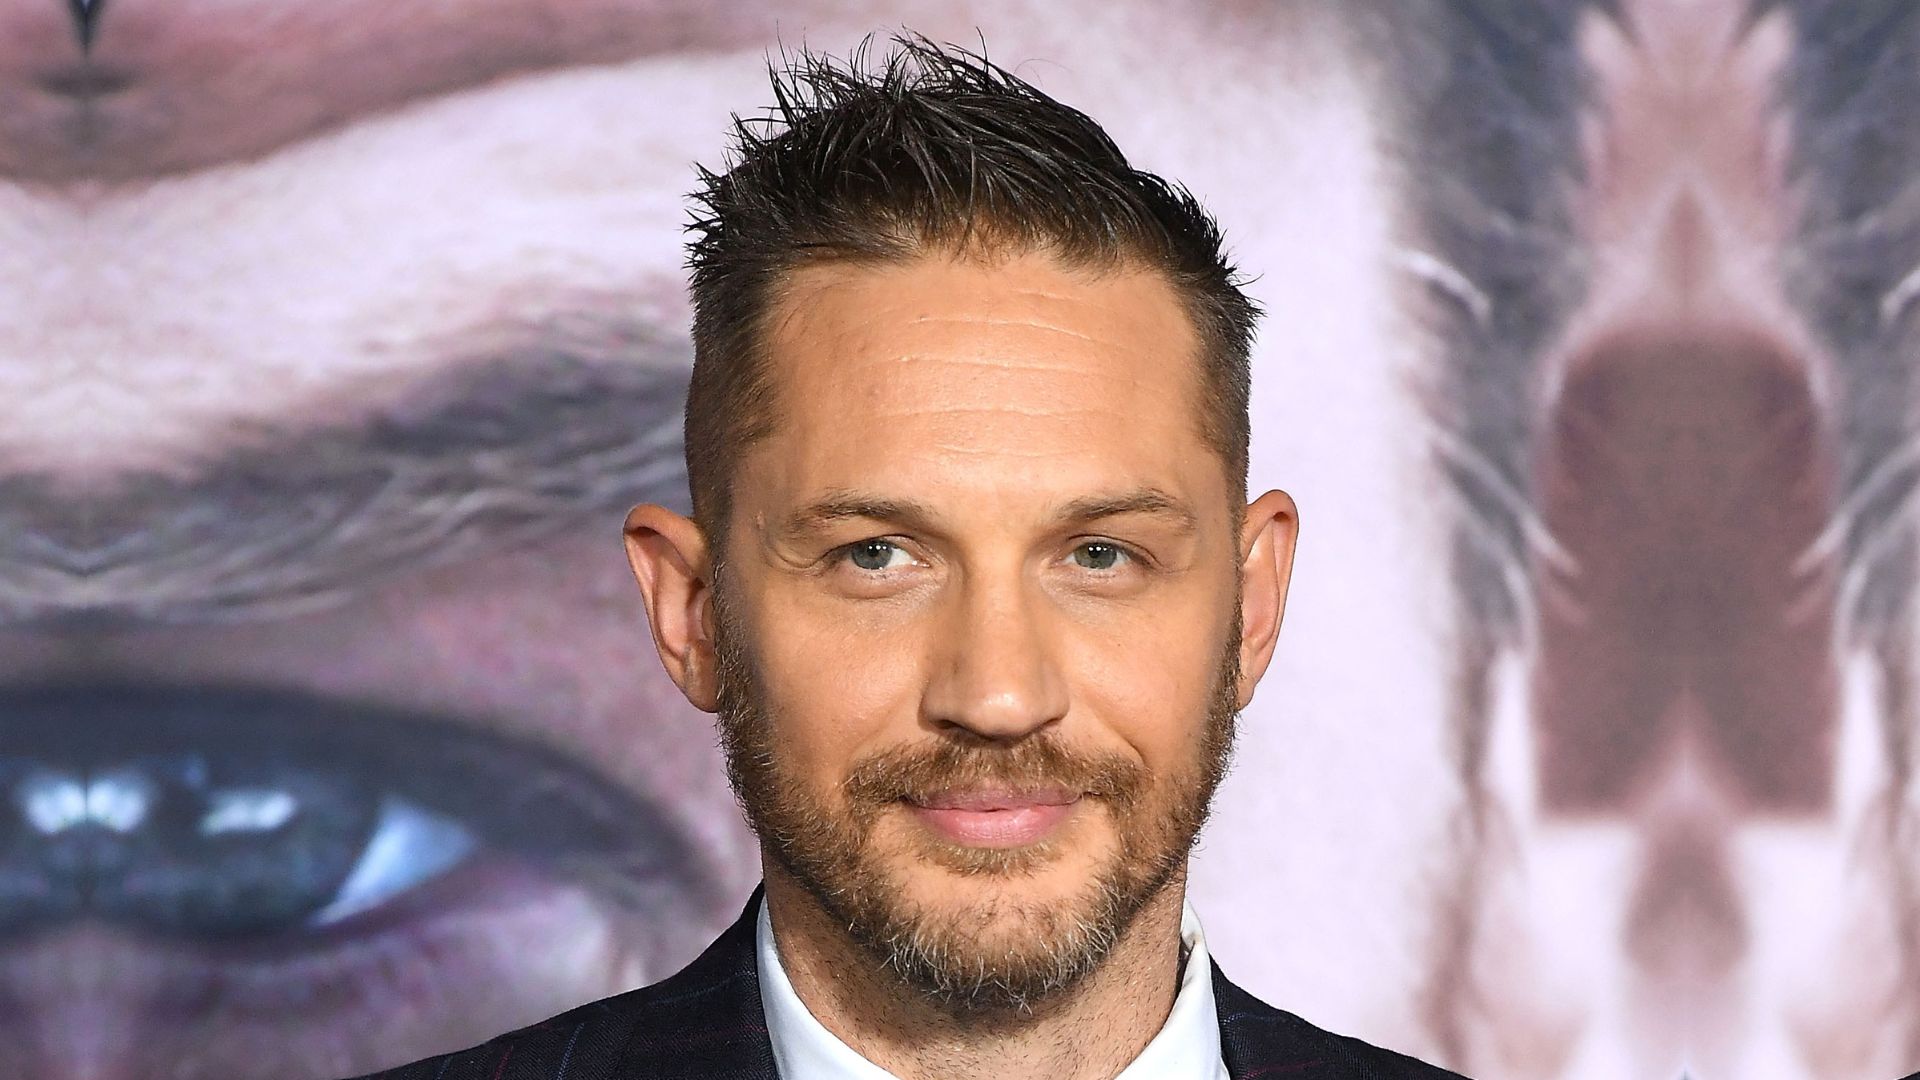 Top 11 Tom Hardy Hairstyles to Take Inspiration From - Gentleman Haircut